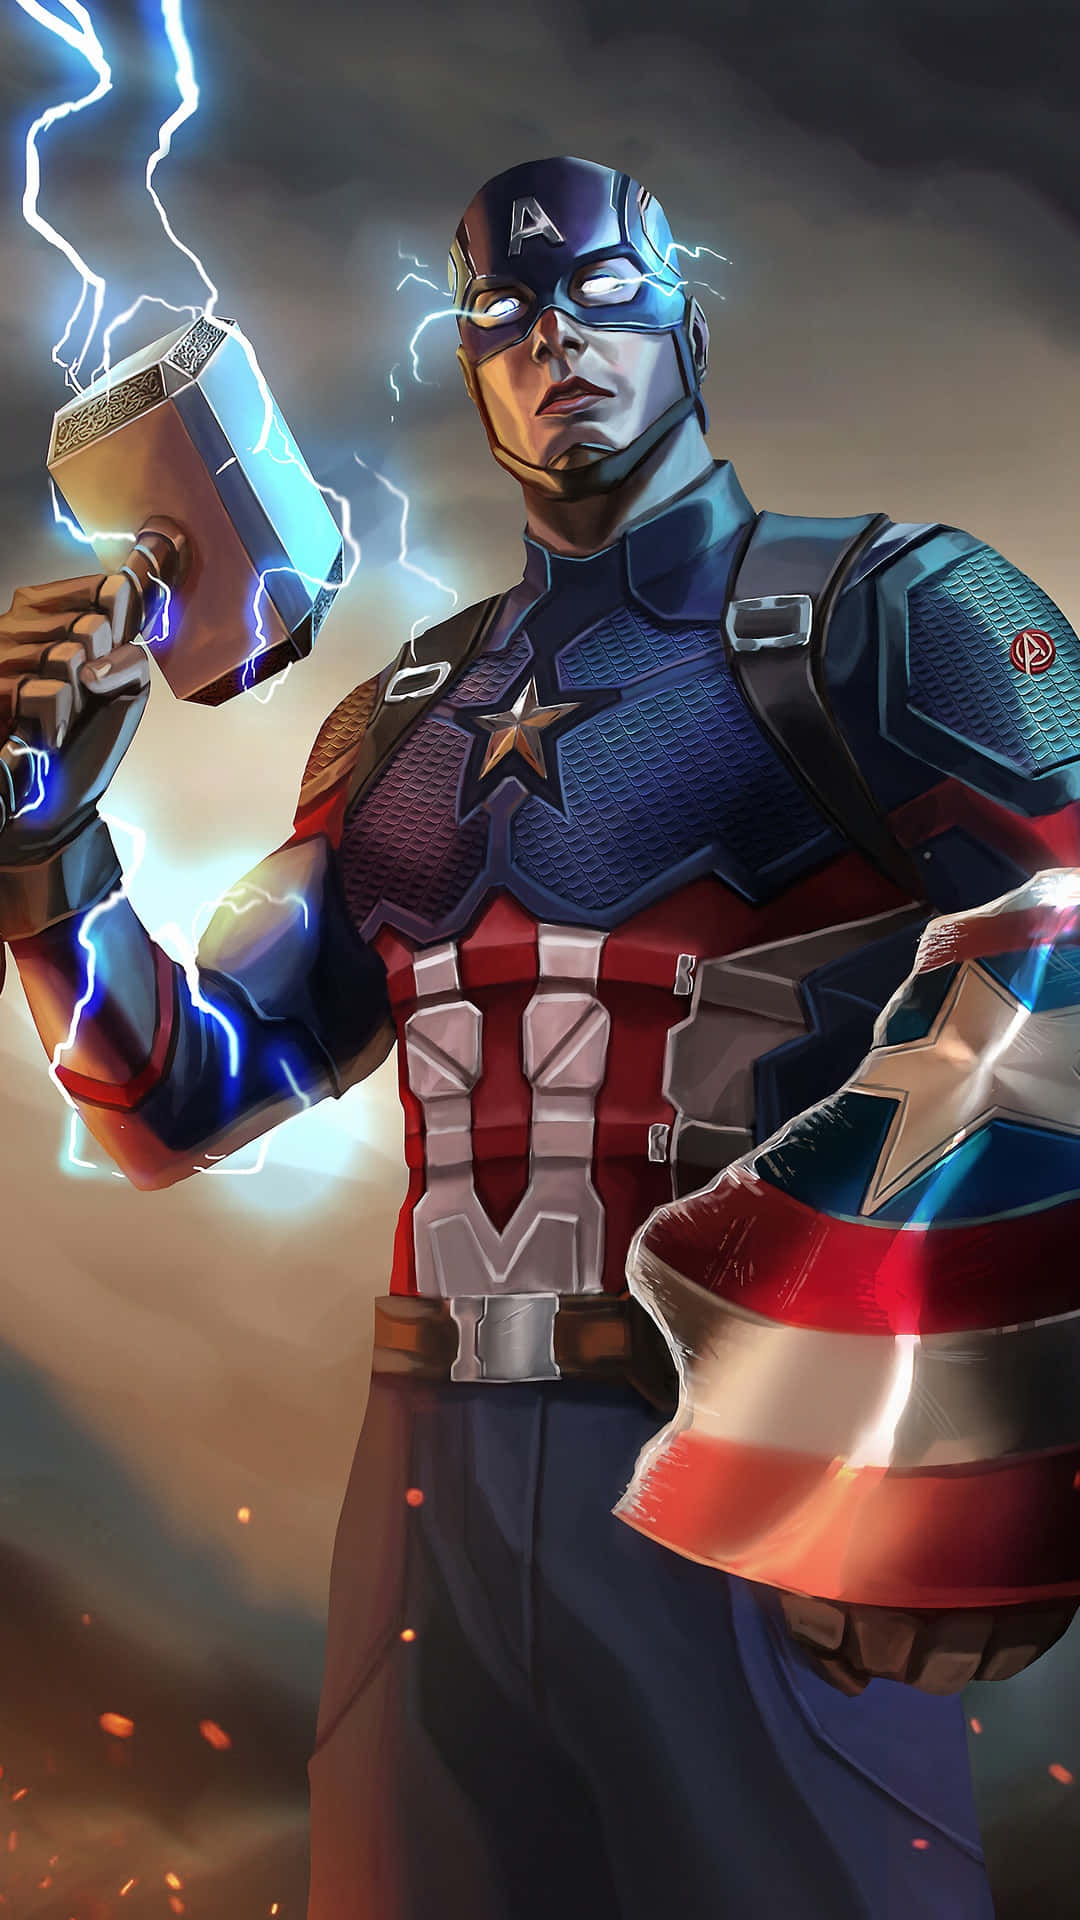 Captain America stands ready to defend freedom Wallpaper